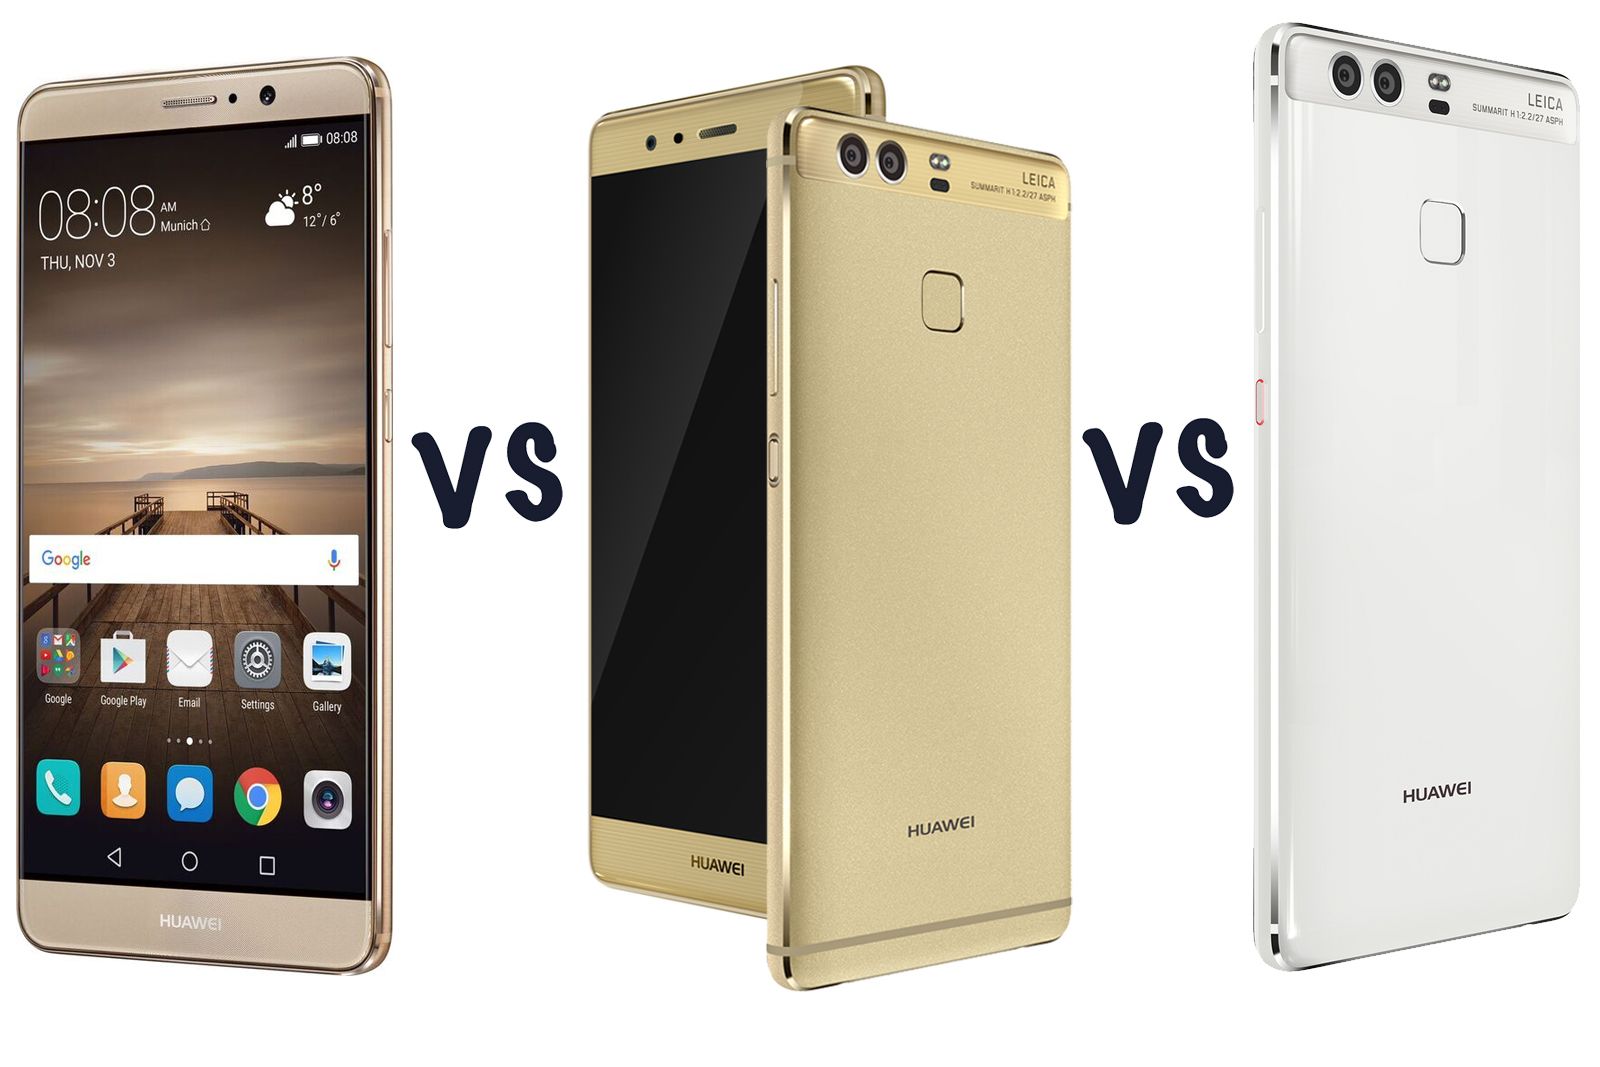 huawei p9 vs huawei p9 plus vs huawei mate 9 what s the difference image 1